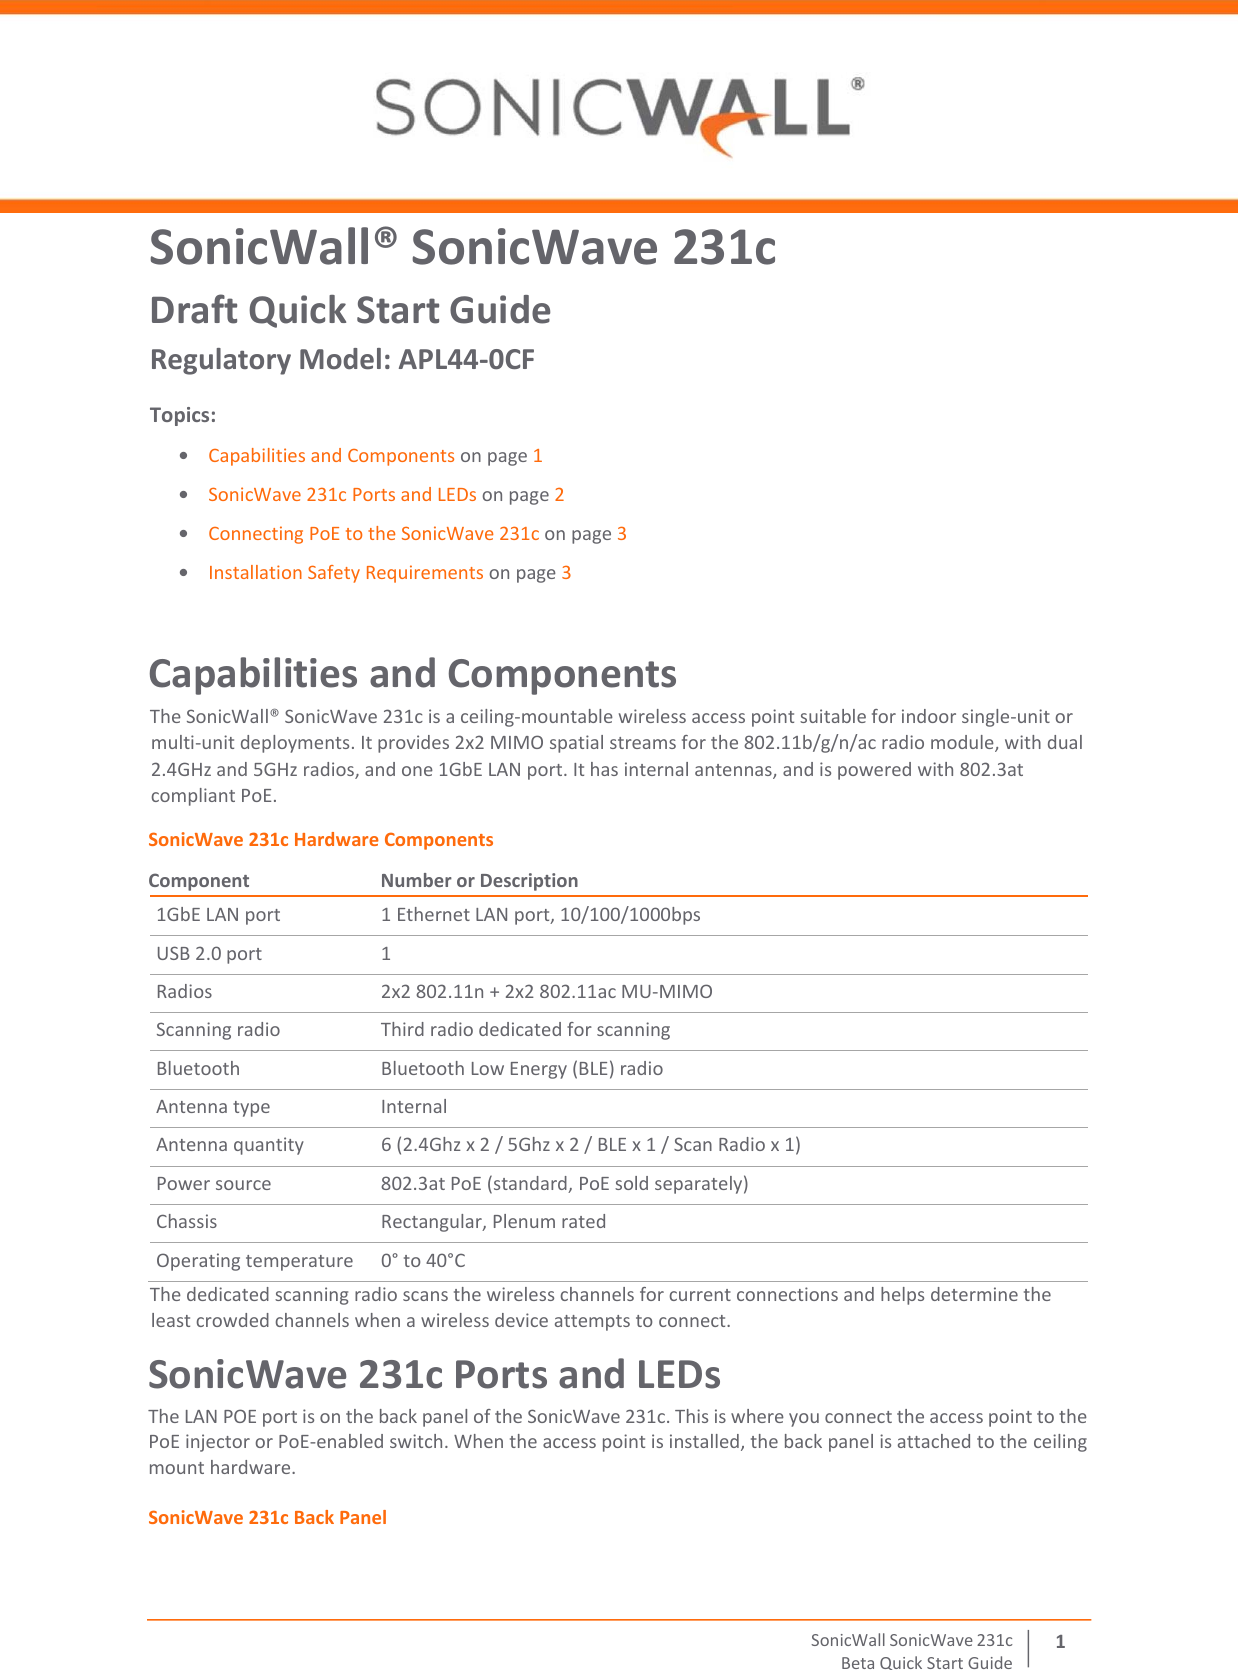  SonicWall   SonicWave   231 c Beta   Quick   Start   Guide 1 SonicWall® SonicWave 231c Draft Quick Start Guide Regulatory Model: APL44-0CF Topics: • Capabilities and Components on page 1 • SonicWave 231c Ports and LEDs on page 2 • Connecting PoE to the SonicWave 231c on page 3 • Installation Safety Requirements on page 3 Capabilities and Components The SonicWall® SonicWave 231c is a ceiling‐mountable wireless access point suitable for indoor single‐unit or multi‐unit deployments. It provides 2x2 MIMO spatial streams for the 802.11b/g/n/ac radio module, with dual 2.4GHz and 5GHz radios, and one 1GbE LAN port. It has internal antennas, and is powered with 802.3at compliant PoE.  SonicWave 231c Hardware Components Component  Number or Description 1GbE LAN port 1 Ethernet LAN port, 10/100/1000bps USB 2.0 port 1 Radios 2x2 802.11n + 2x2 802.11ac MU‐MIMO Scanning radio Third radio dedicated for scanning Bluetooth Bluetooth Low Energy (BLE) radio Antenna type Internal Antenna quantity 6 (2.4Ghz x 2 / 5Ghz x 2 / BLE x 1 / Scan Radio x 1) Power source 802.3at PoE (standard, PoE sold separately) Chassis Rectangular, Plenum rated Operating temperature 0° to 40°C The dedicated scanning radio scans the wireless channels for current connections and helps determine the least crowded channels when a wireless device attempts to connect. SonicWave 231c Ports and LEDs The LAN POE port is on the back panel of the SonicWave 231c. This is where you connect the access point to the PoE injector or PoE‐enabled switch. When the access point is installed, the back panel is attached to the ceiling mount hardware. SonicWave 231c Back Panel 